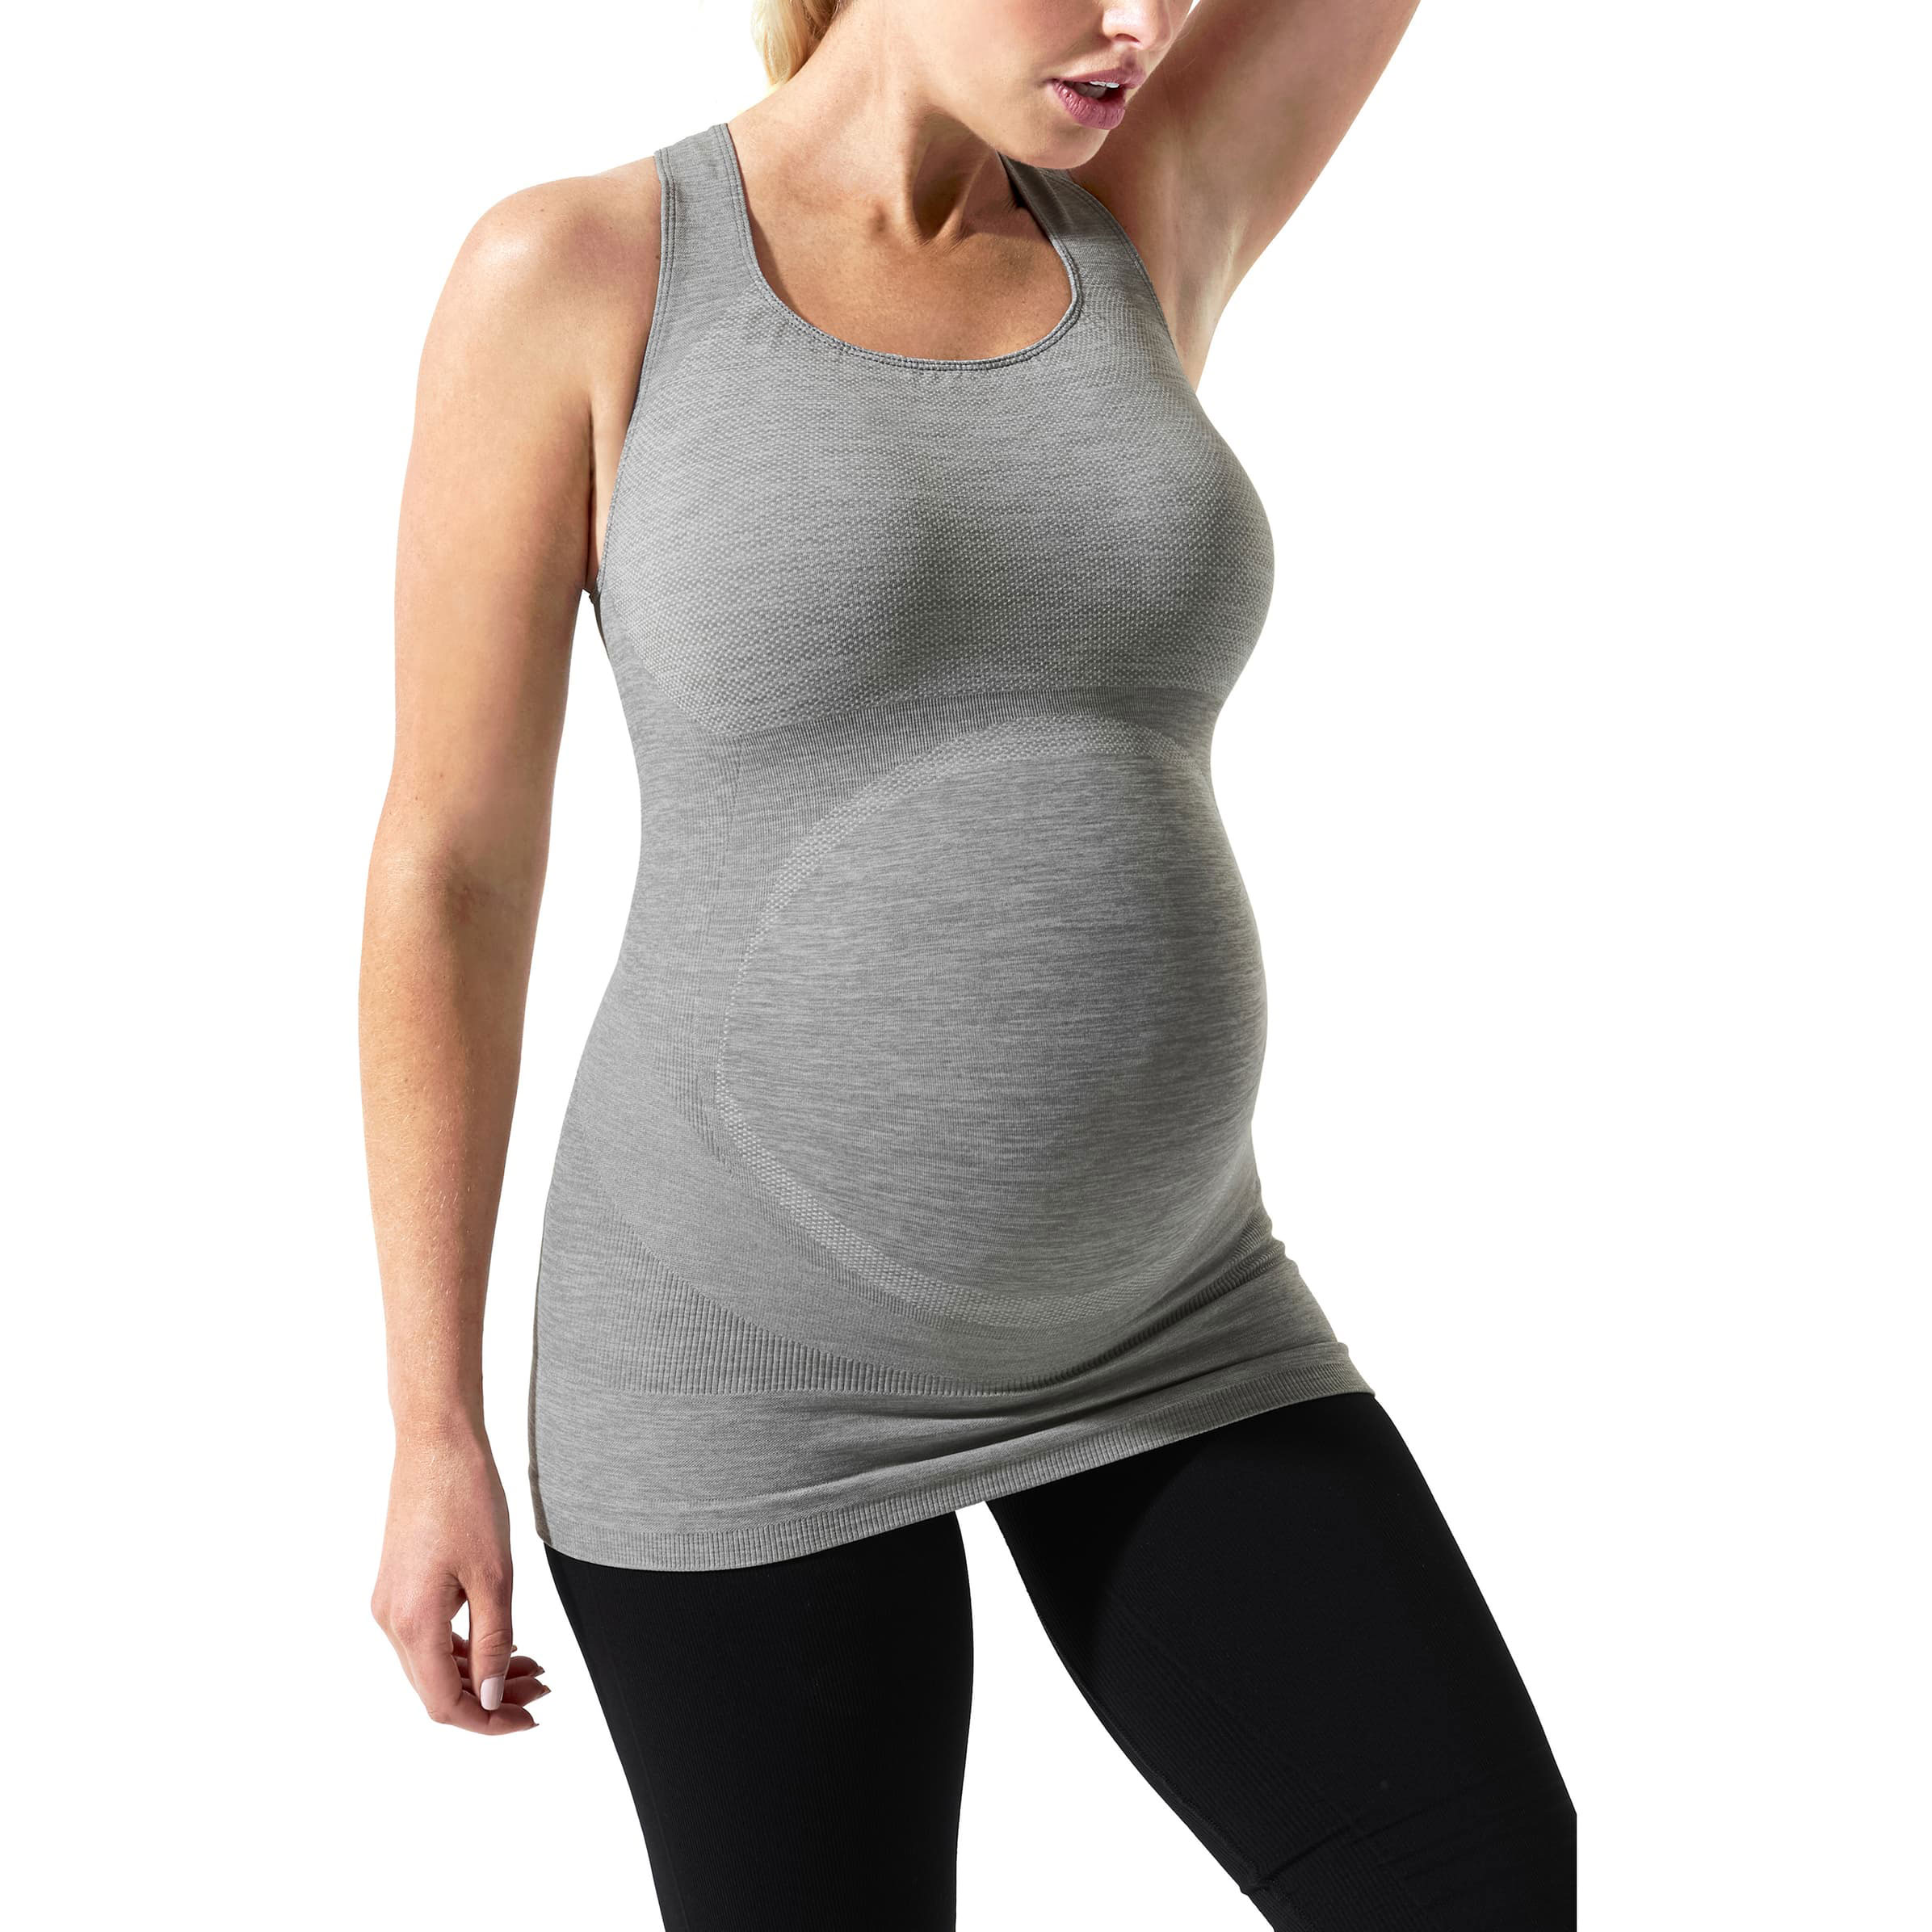 Blanqui SportSupport Maternity Support Crossback Tank